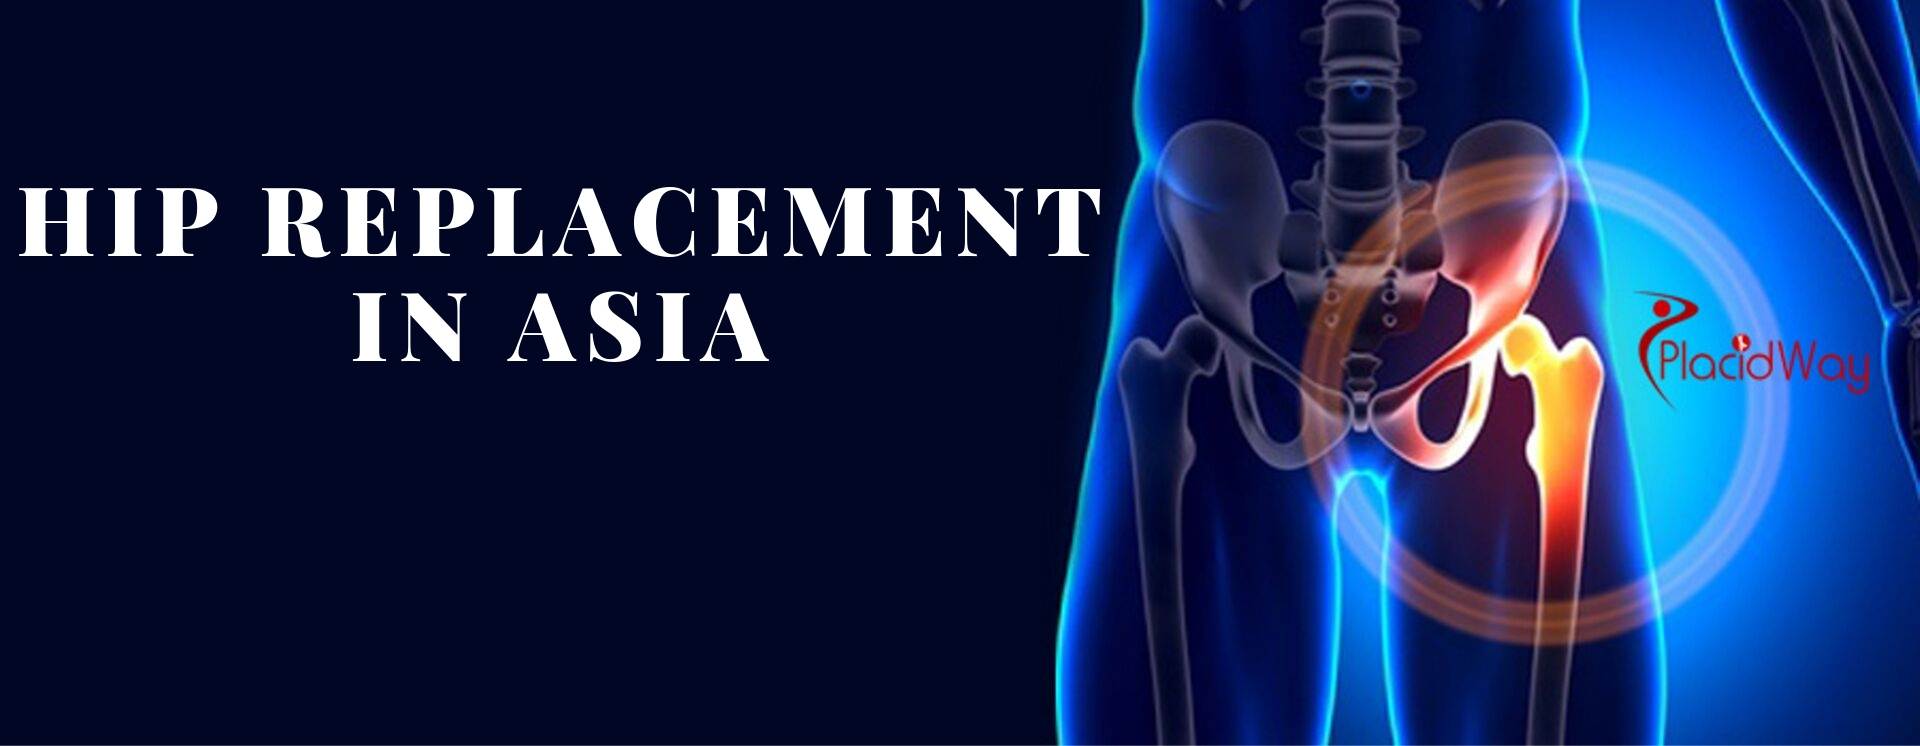 Hip Replacement in Asia